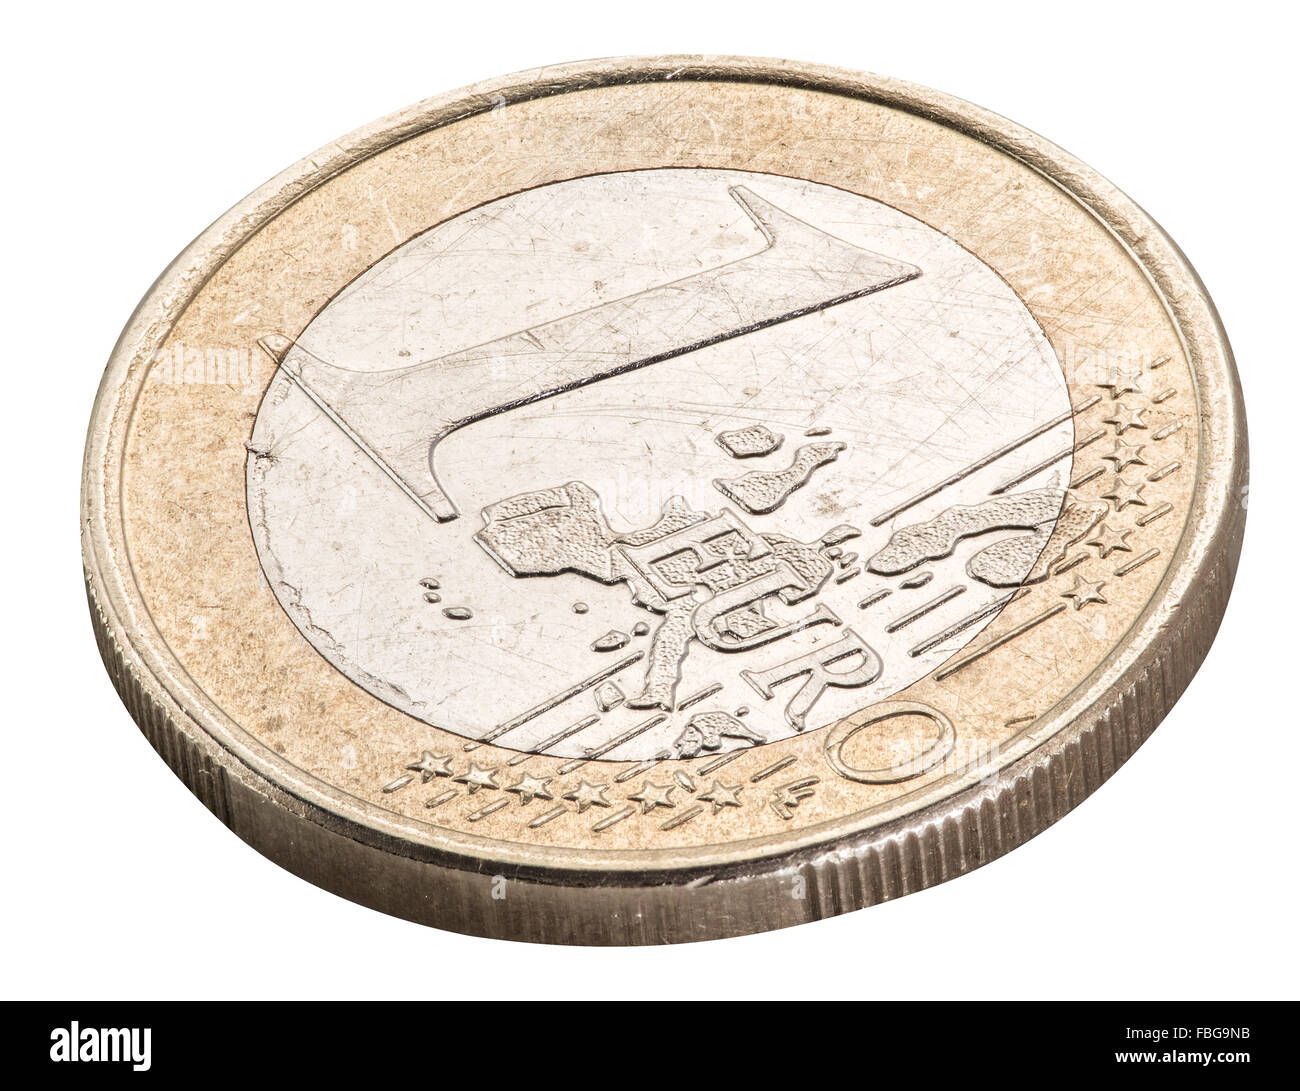 Old one Euro coin isolated on a white background. File contains clipping paths. Stock Photo